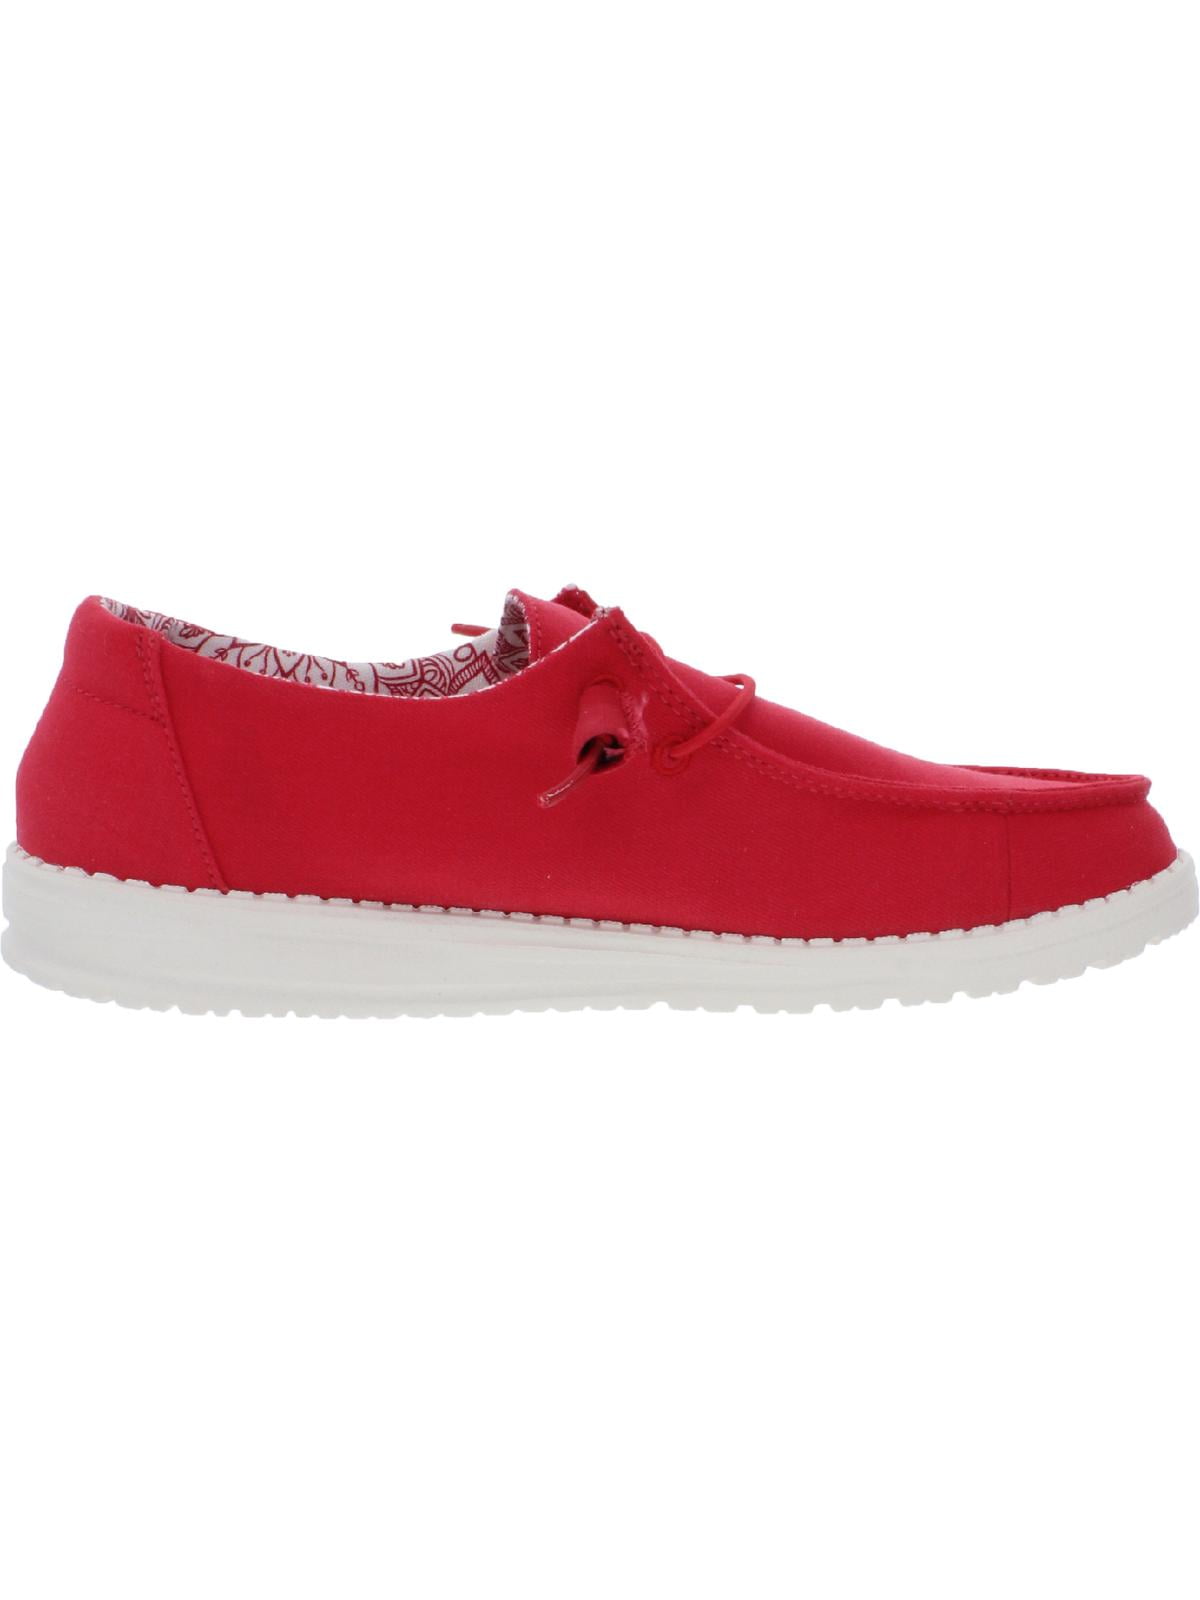 HEYDUDE | Women's Casual | Women's Wendy Louisville Cardinals - Red/White | Size 11